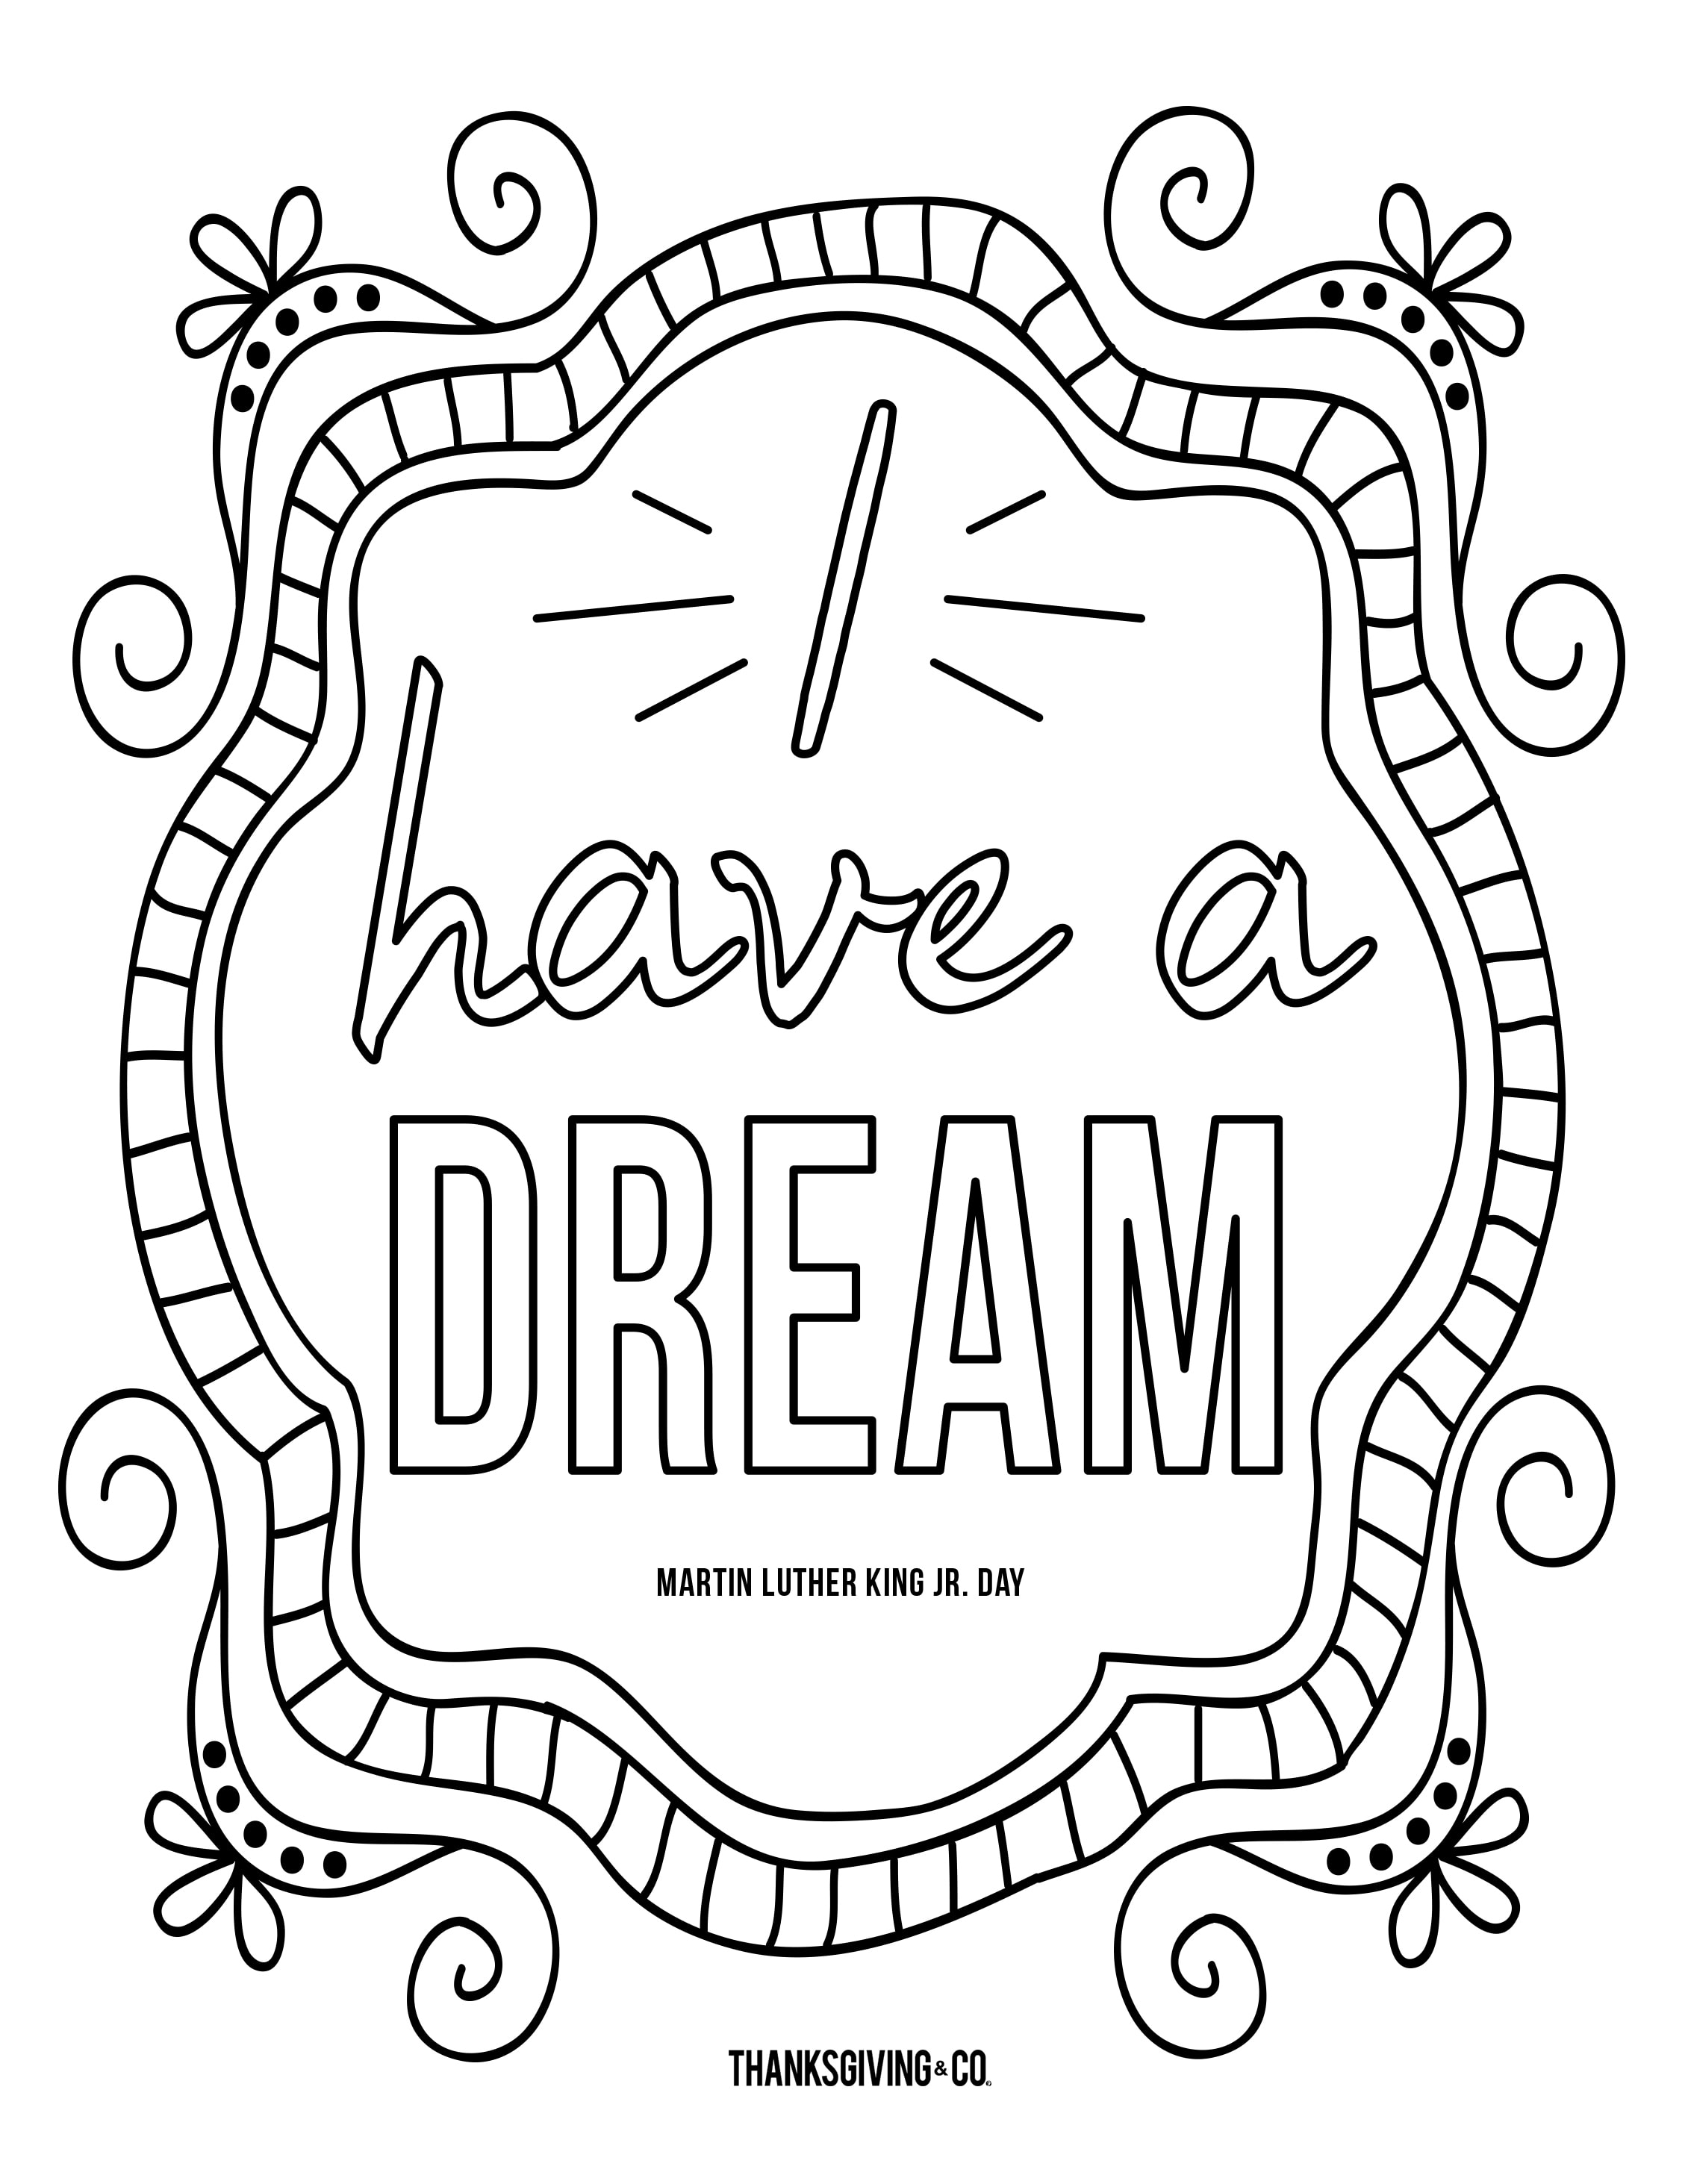 Share these fun Martin Luther King Jr. coloring pages with your children  and help teach them the meaning of the holiday